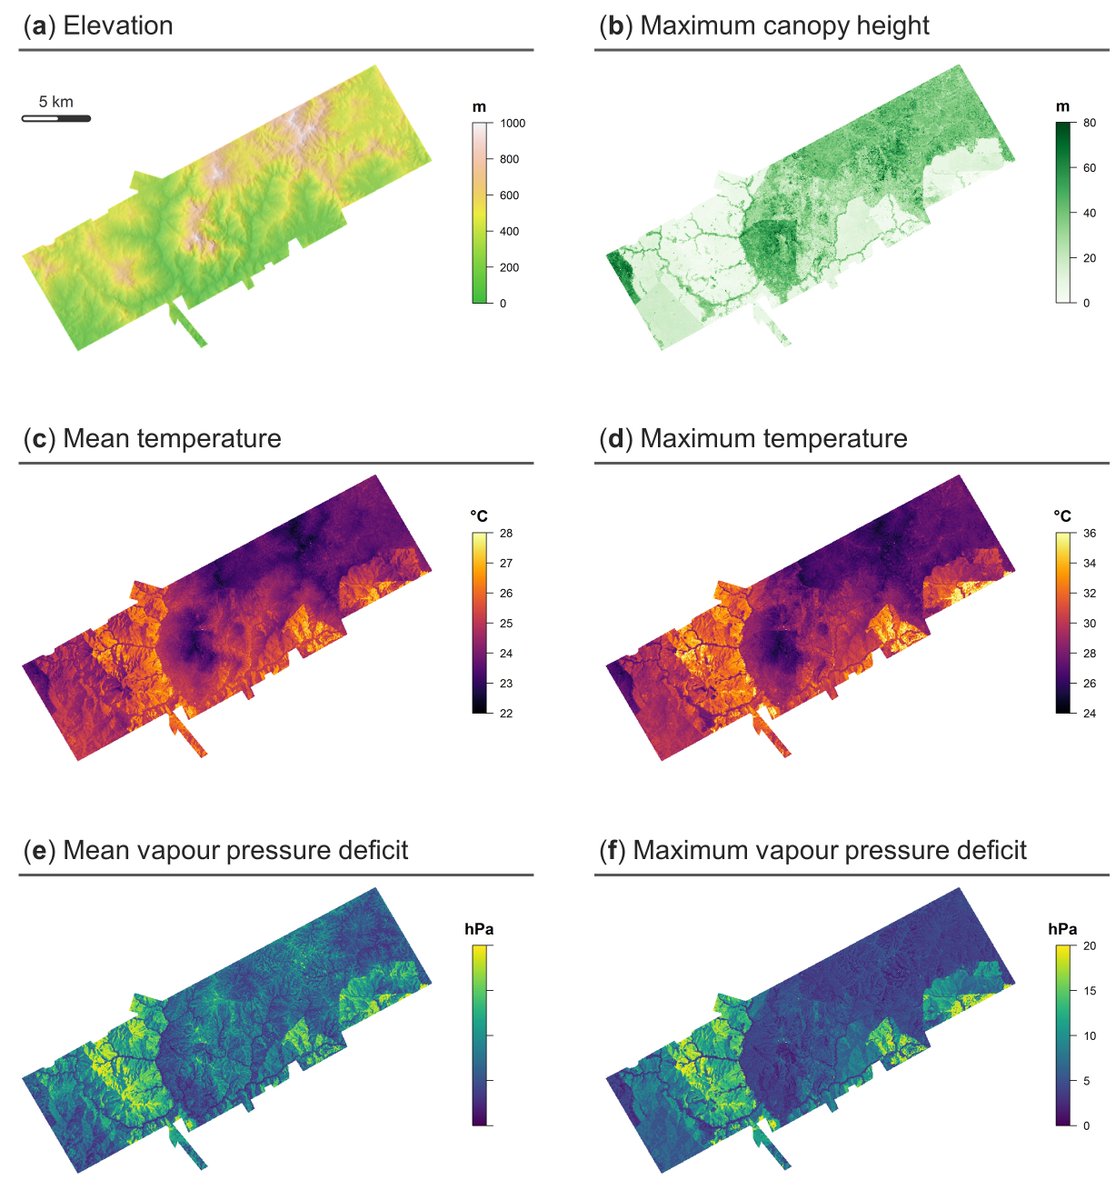 We have a new paper @GlobalChangeBio where we use LiDAR to map the microclimate of human-modified tropical landscapes to better understand the impacts of logging on biodiversity & ecosystem functioning in Borneo: dx.doi.org/10.1111/gcb.14… @SAFE_Project @SEARRP